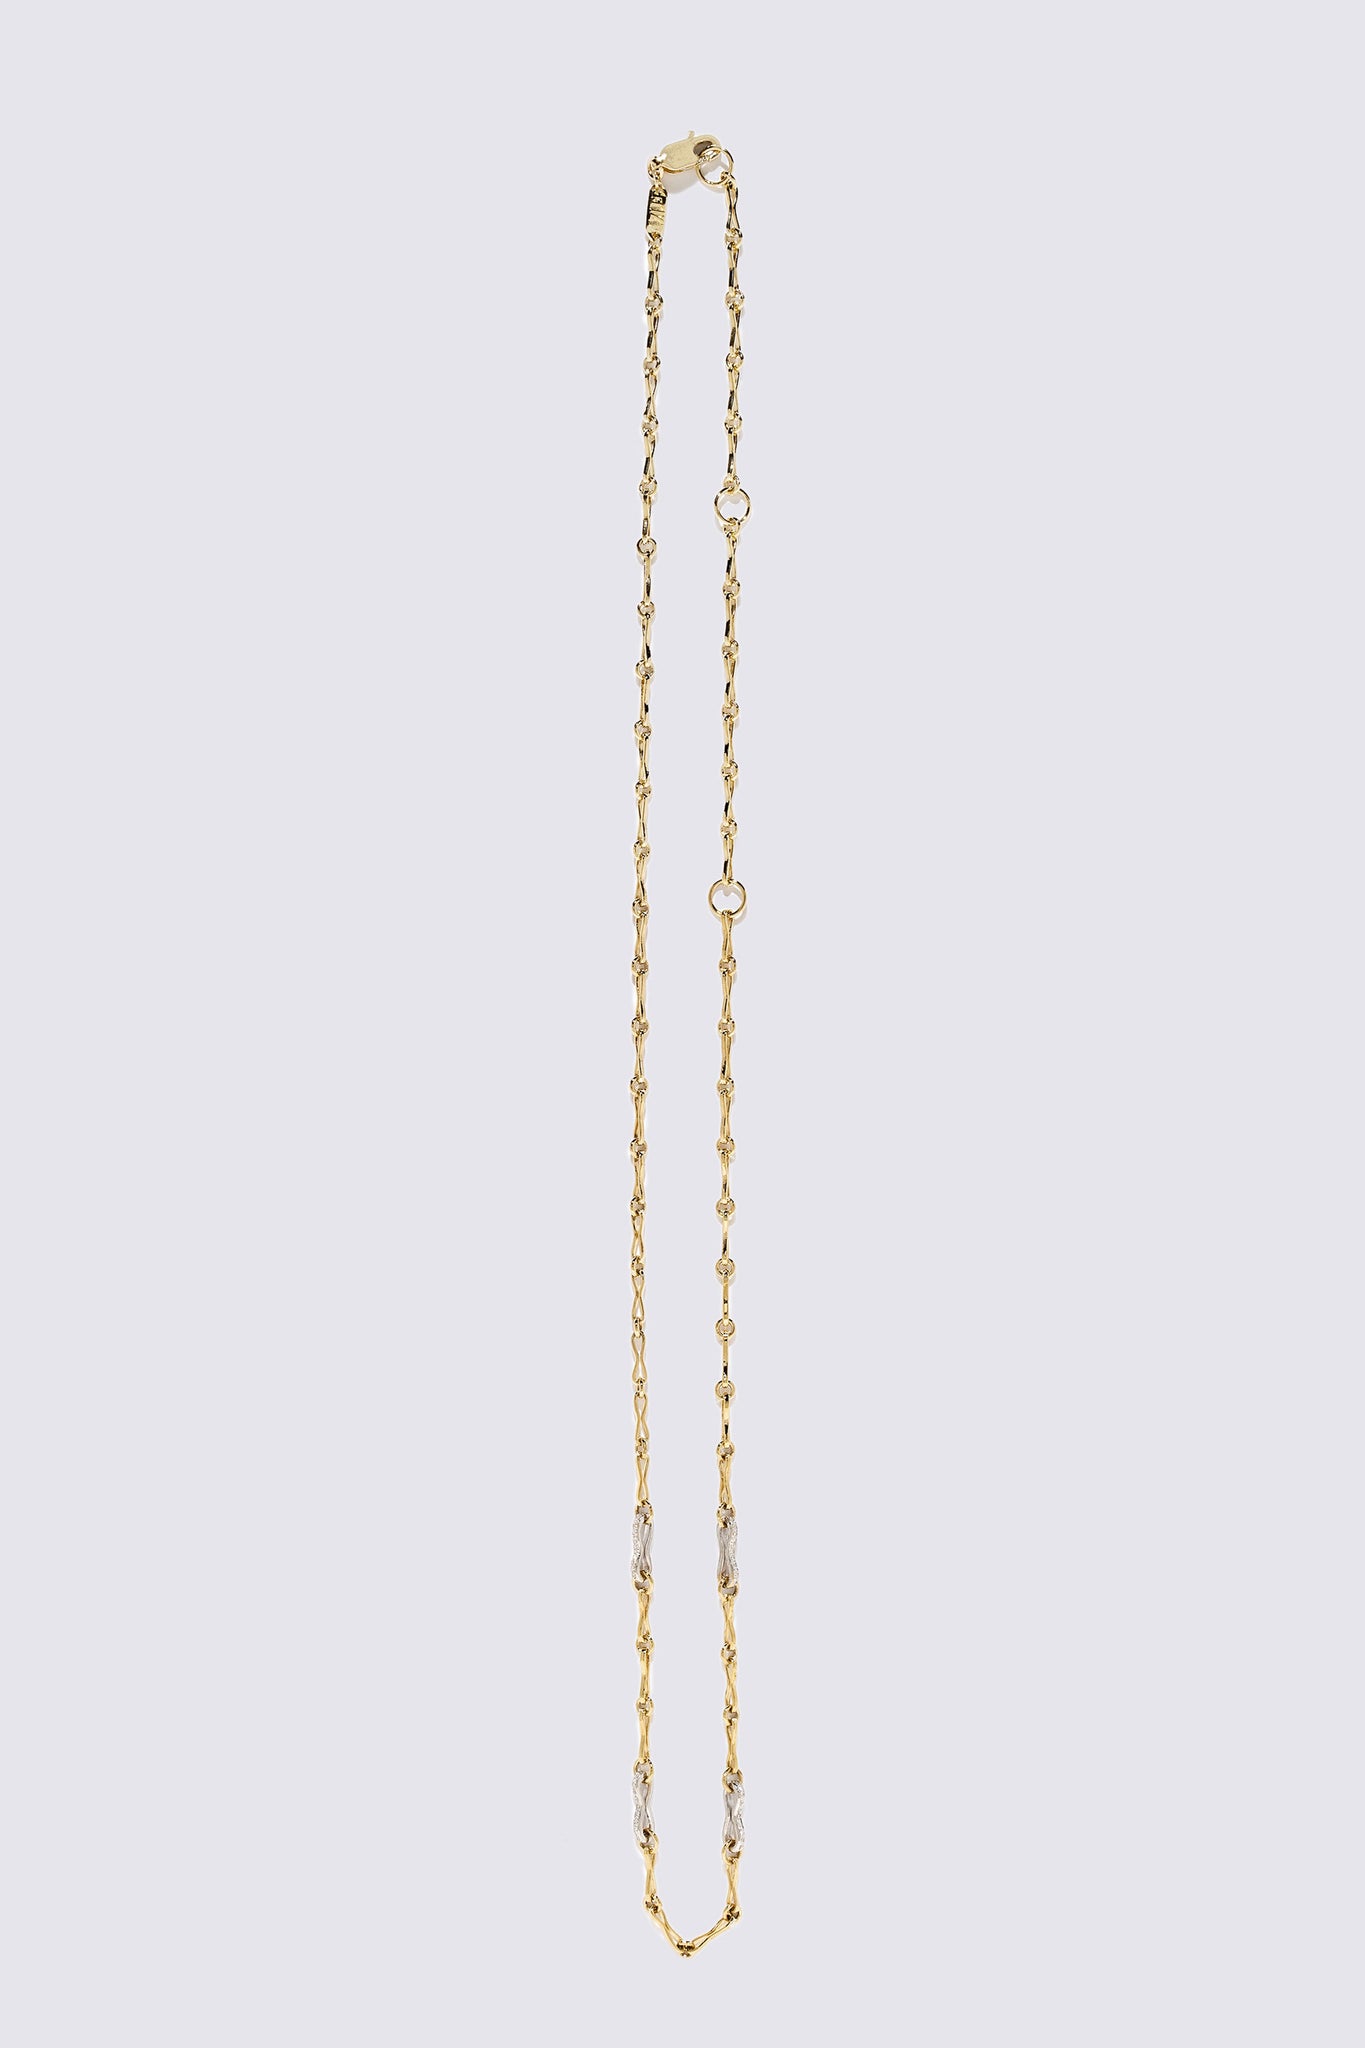 Small Circle Link Chain with Pave Links, Yellow Gold – Kick Pleat